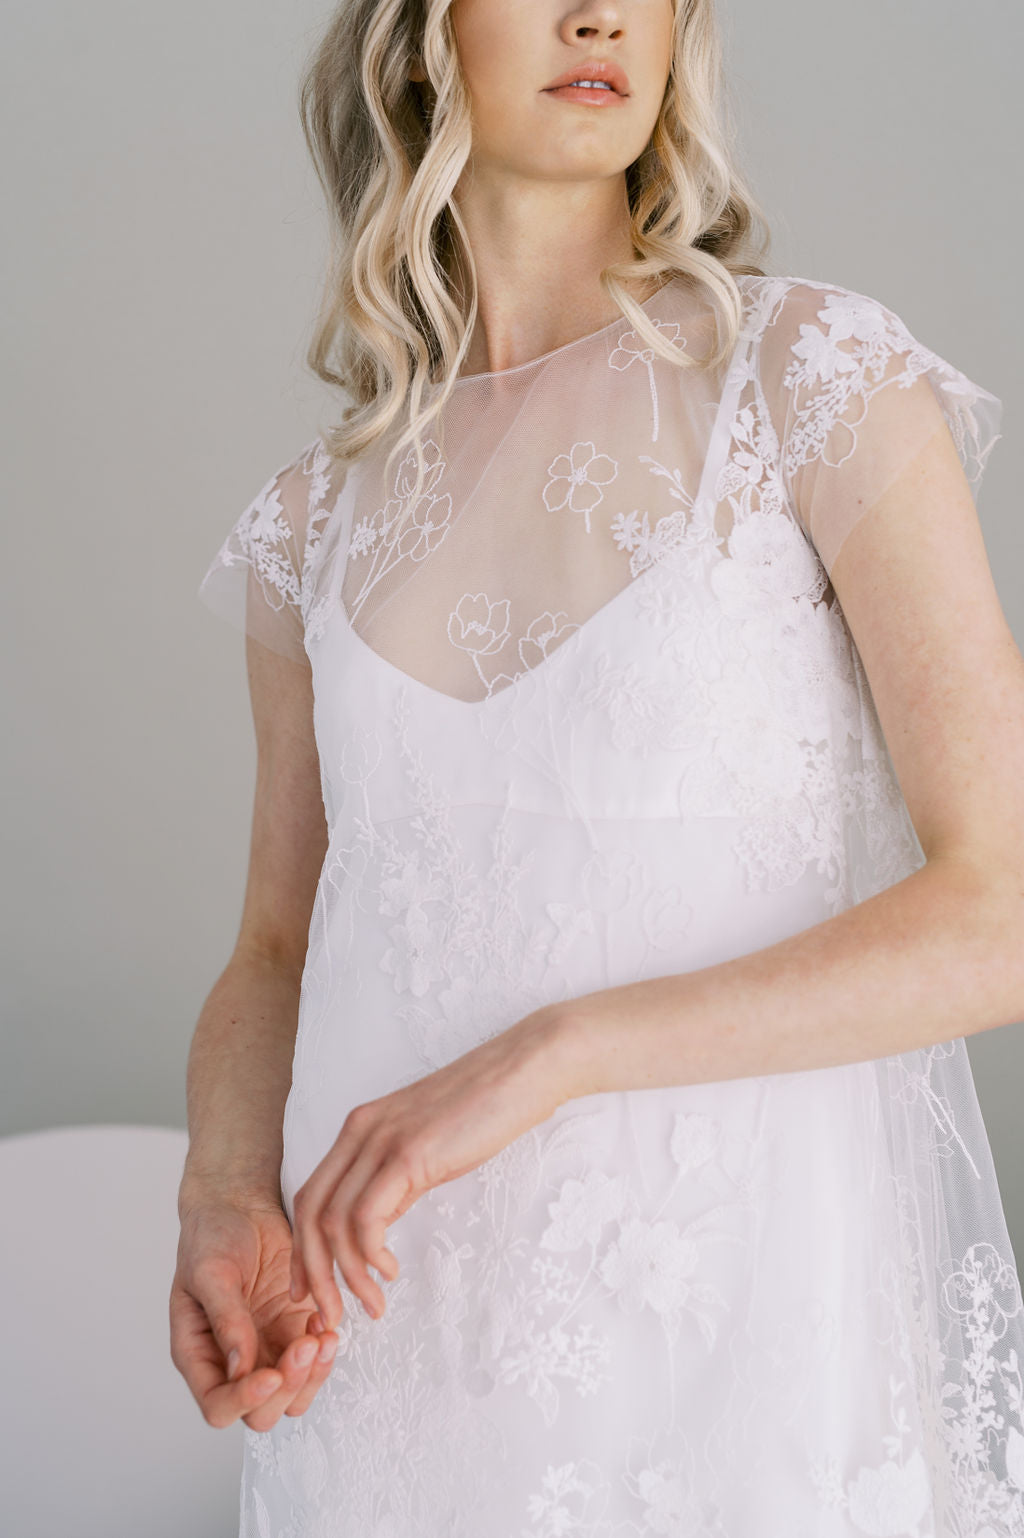 Knee length cotton botanical lace wedding dress. A line with cap sleeves and crepe slip. Handmade by Catherine Langlois, Toronto, Canada.